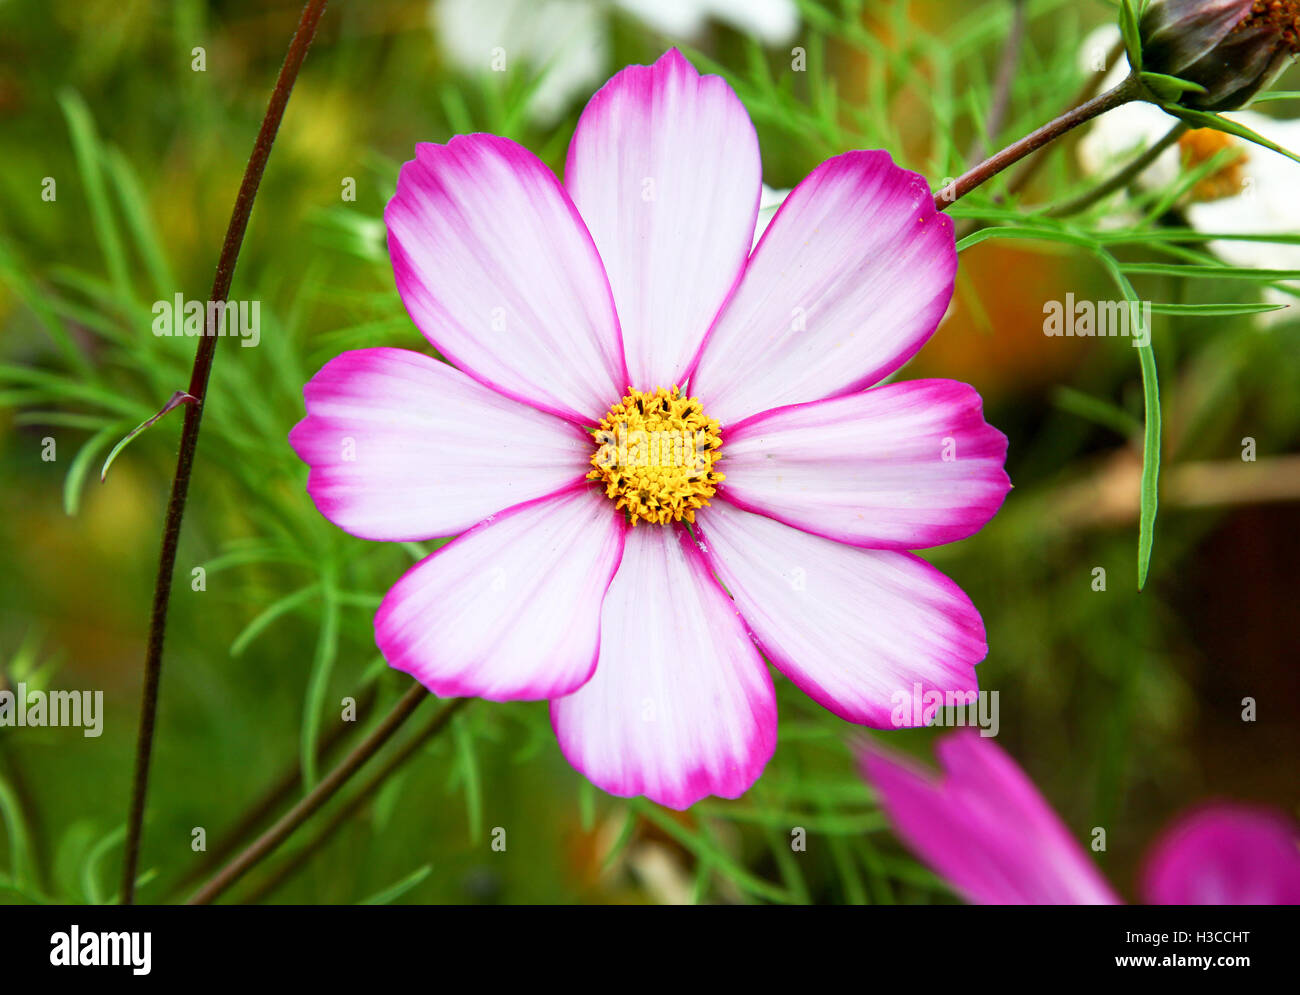 The pink and white flower head of a Picotee Cosmos flower Stock Photo